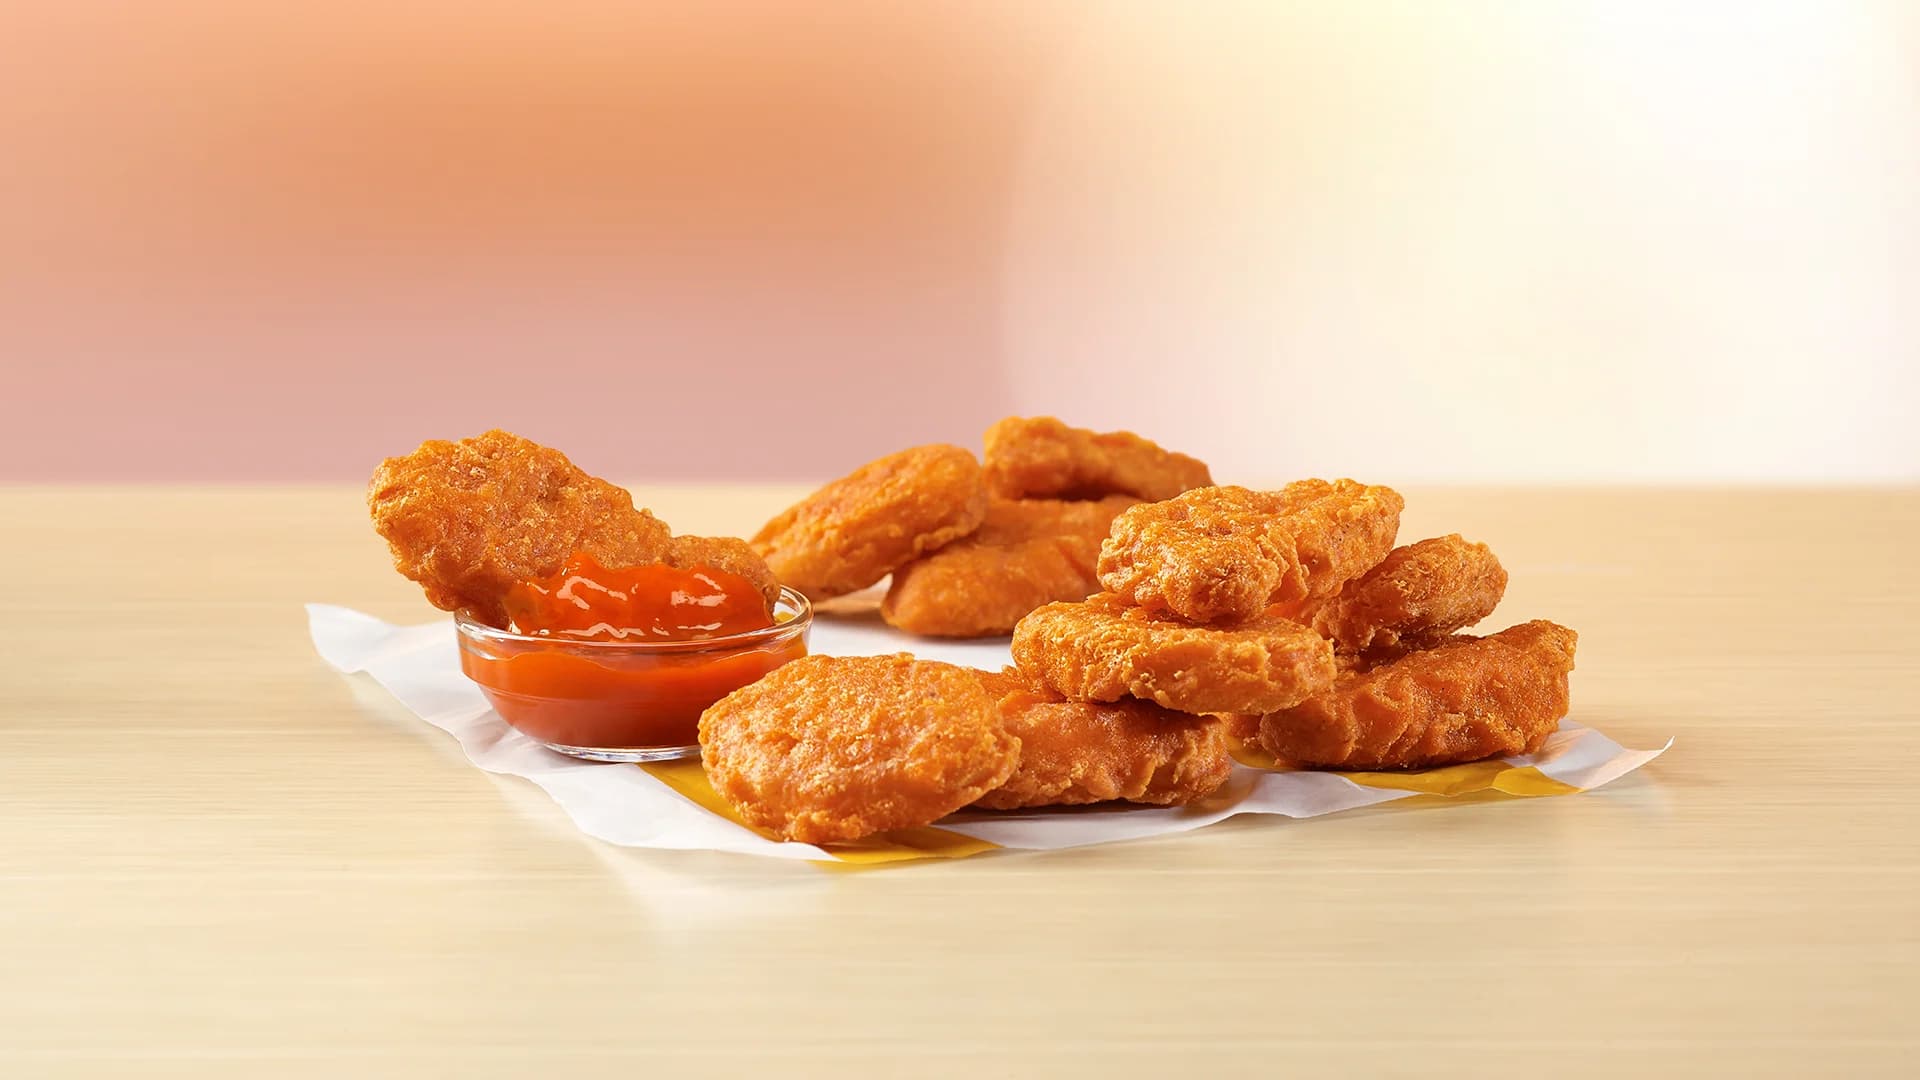 Do you love spice? The Spicy Chicken McNuggets are back at participating McDonald's